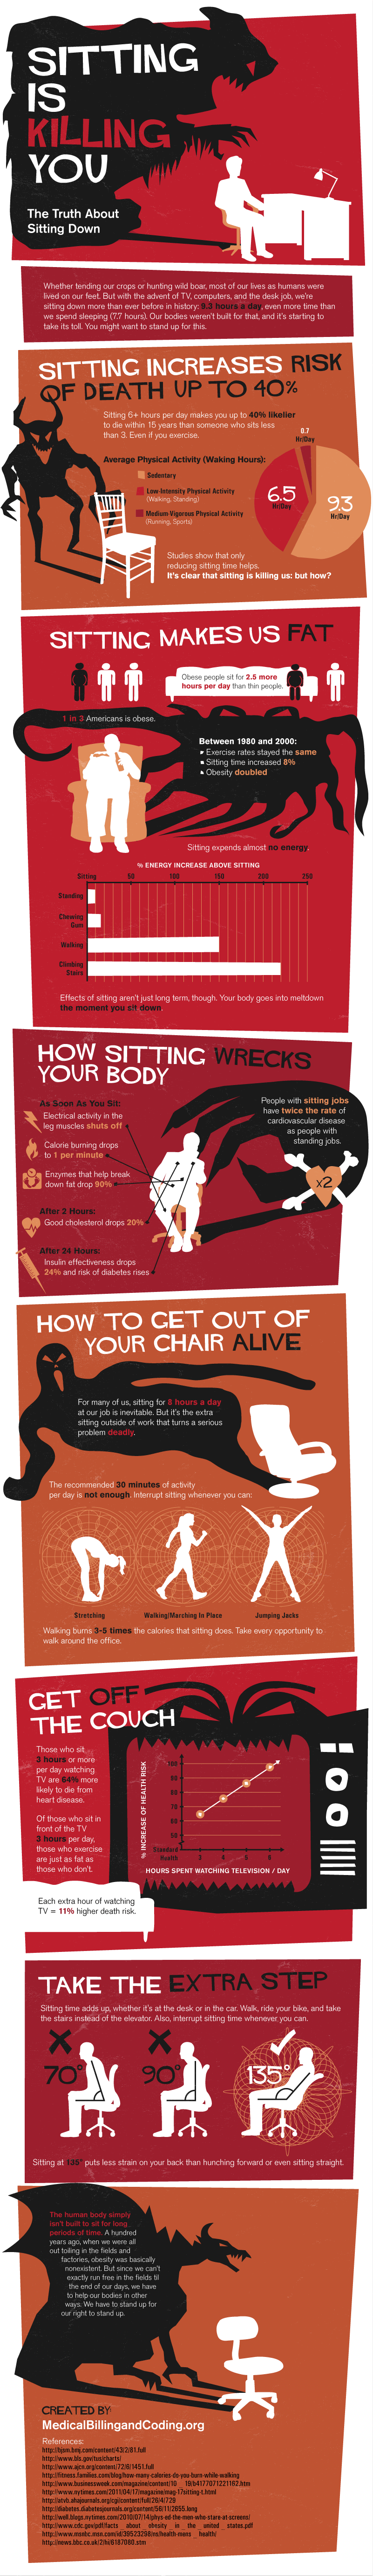 how-sitting-is-killing-you